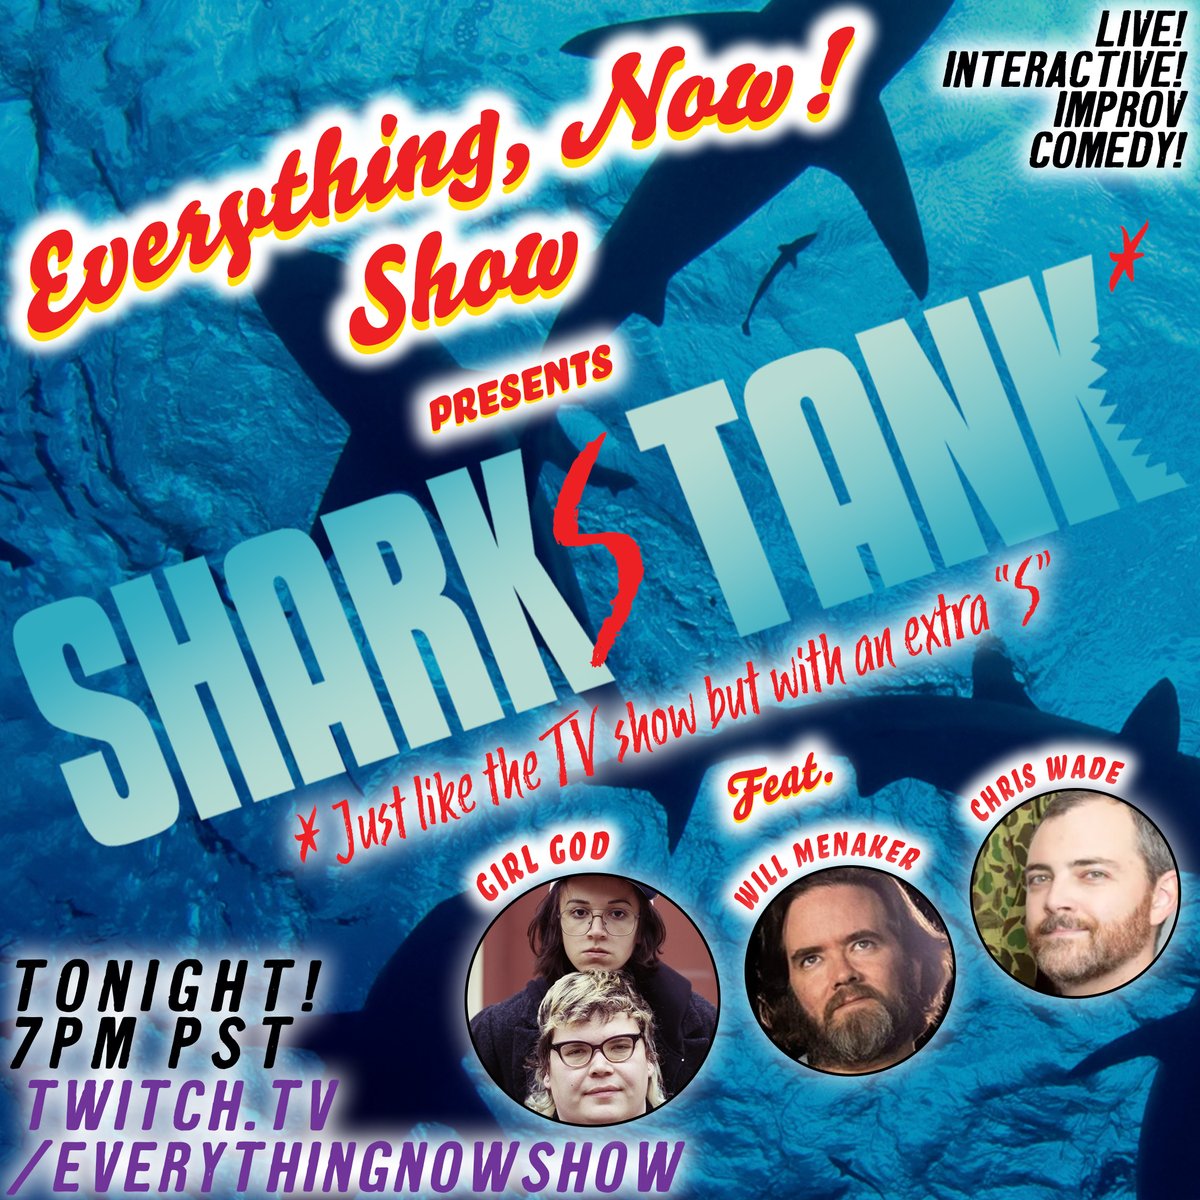 Get your business acumen acumenized -- it's time for another SHARK(S) TANK! Feat. @willmenaker & @saywhatagain of @CHAPOTRAPHOUSE as our sharks, w/ pitches from @autogynefiles & @GraceGFreud of @GirlGodLive !